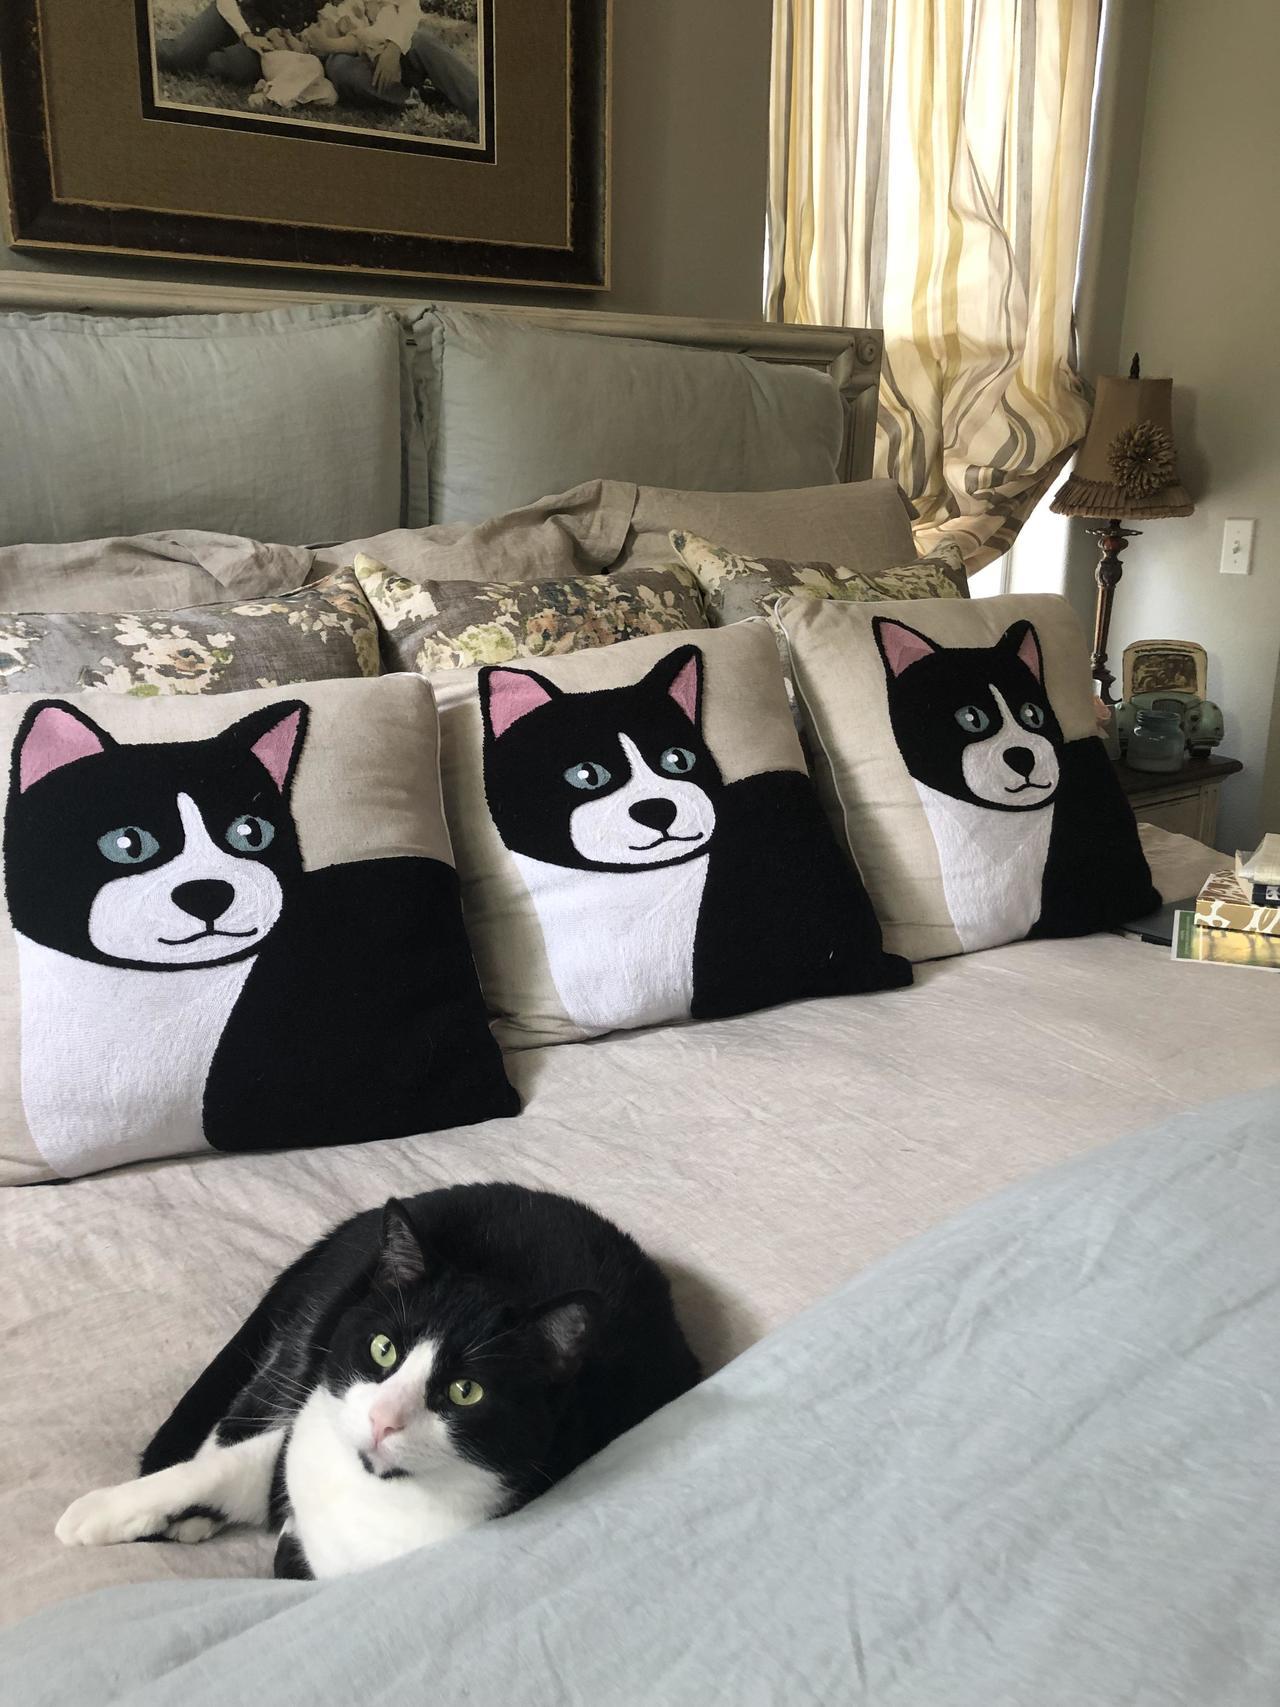 cat laying on a bed with pillows that look like it